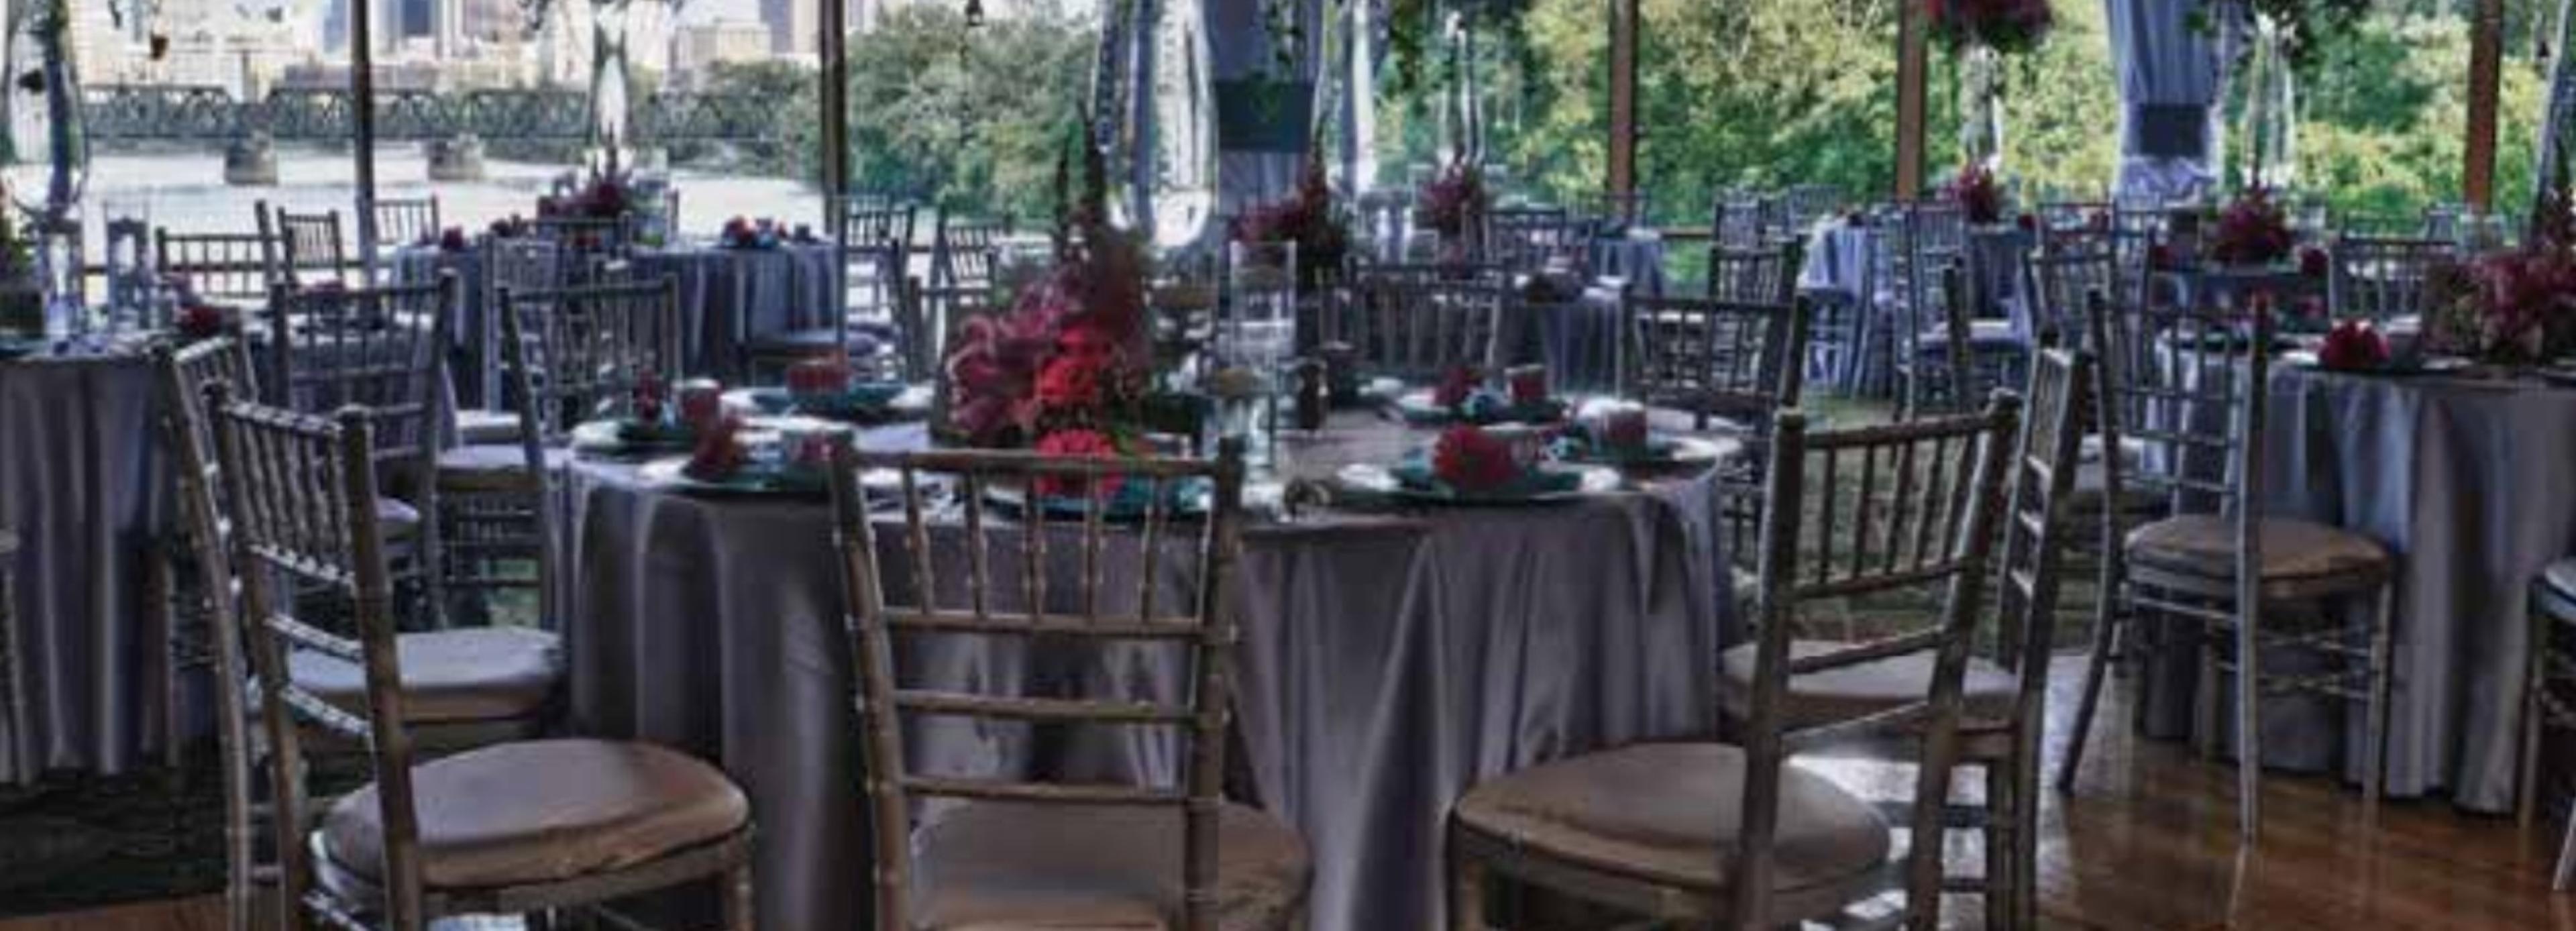 The Boat House Restaurant & Events